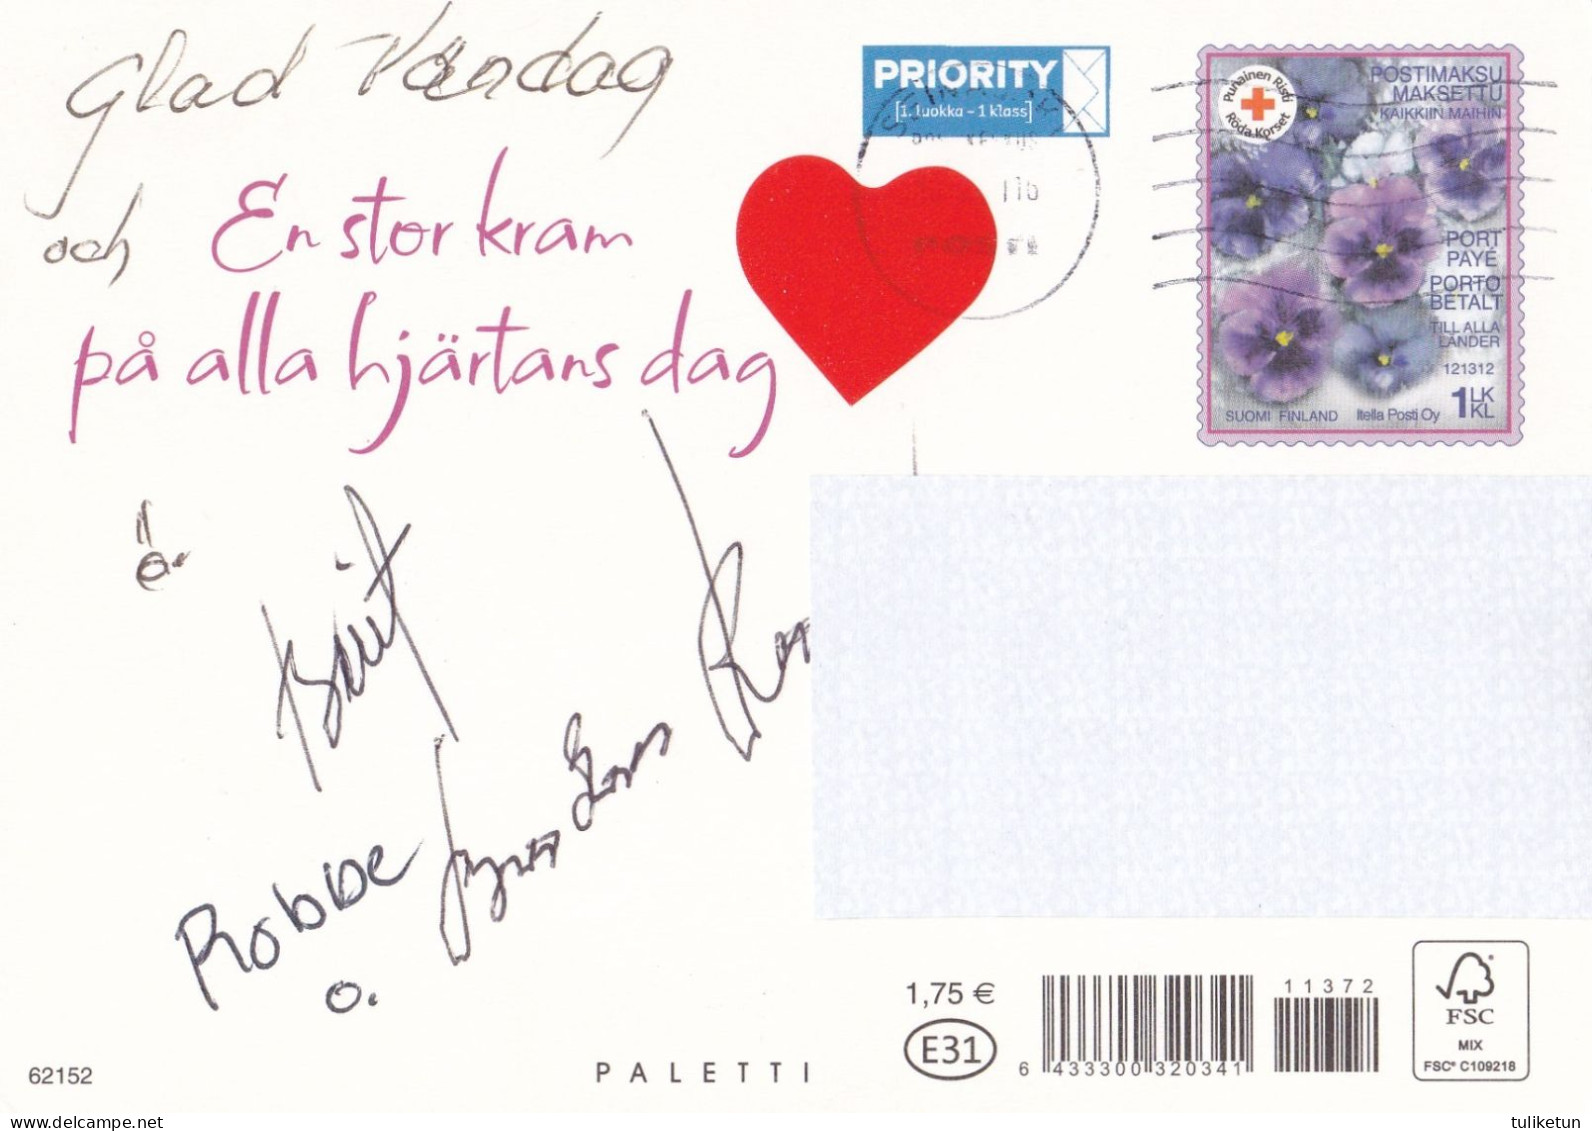 Postal Stationery - Teddy Bear Hugging - Holding Heart - Red Cross - Suomi Finland - Postage Paid - Postal Stationery